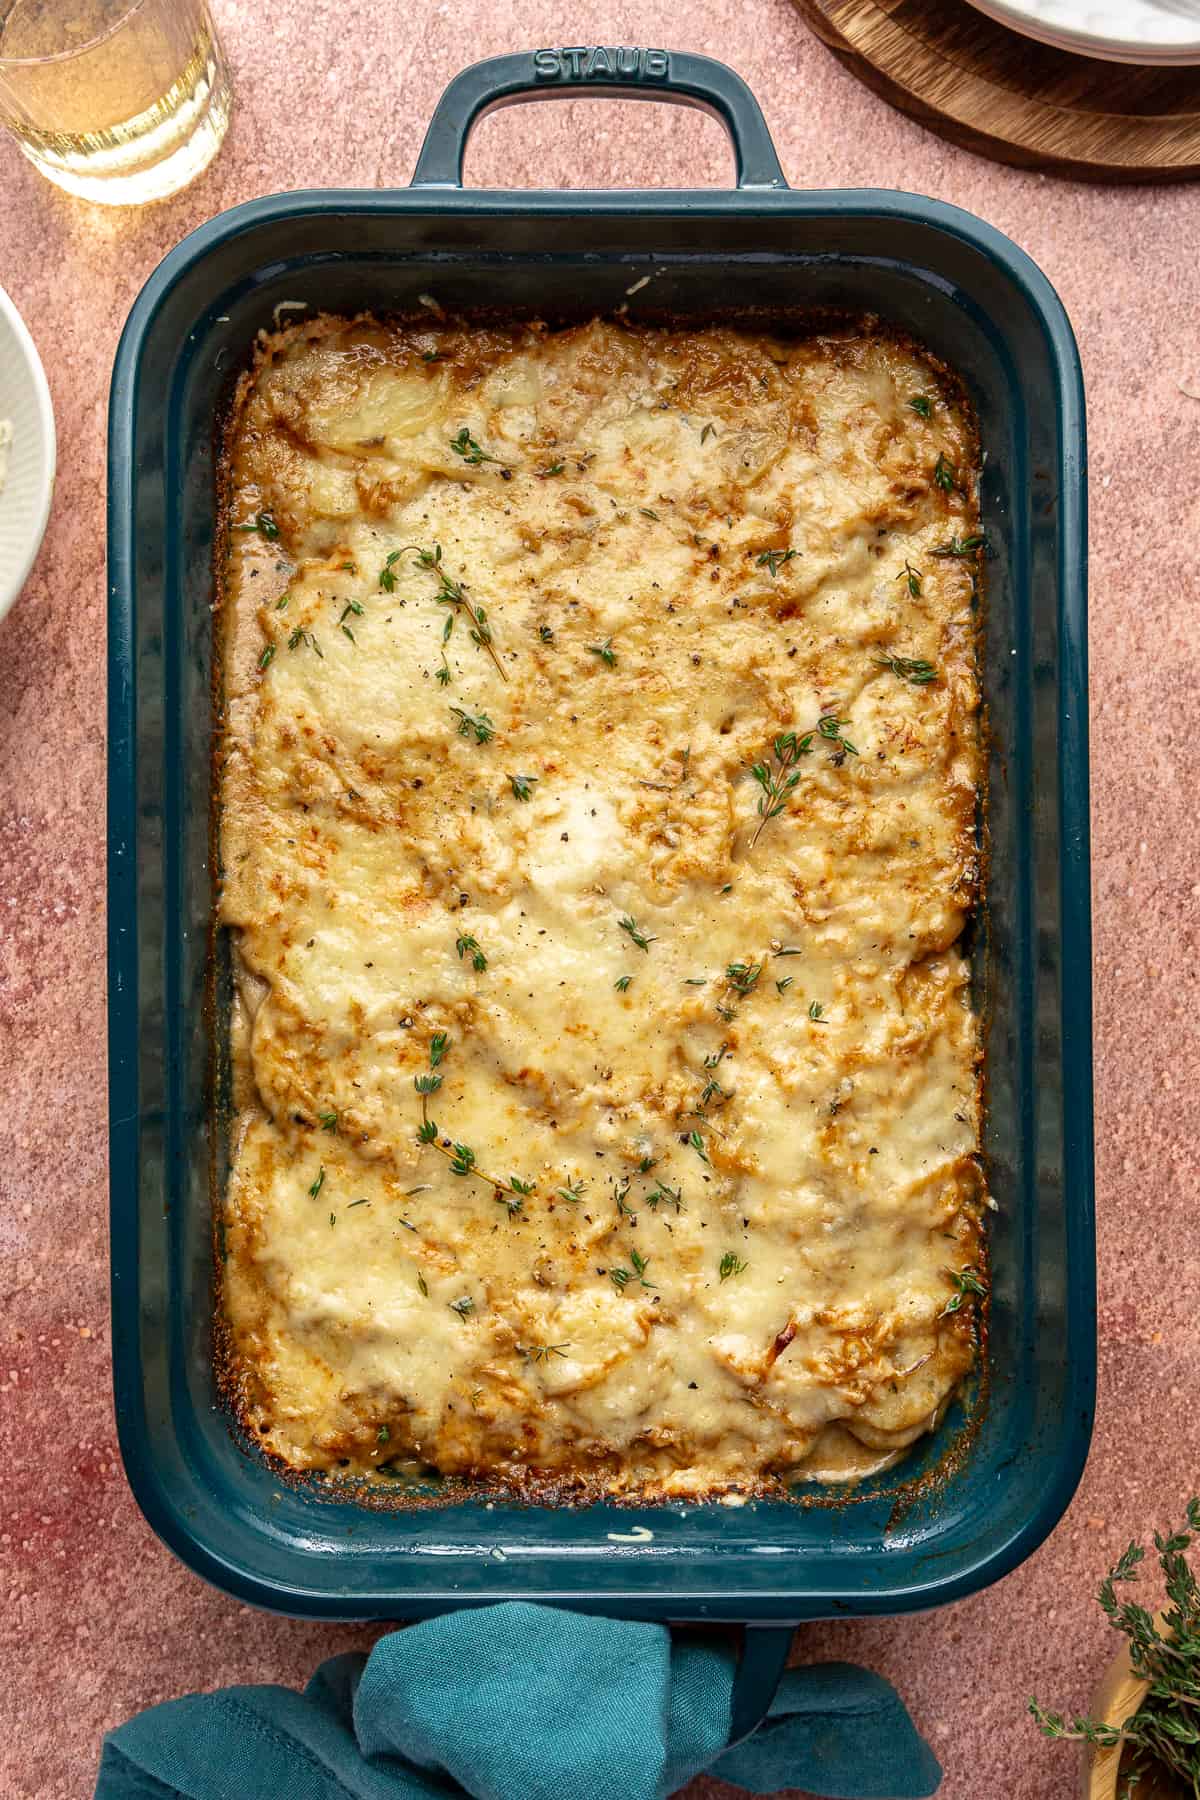 Blue baking dish of Caramelized Onion Scalloped Potatoes on red backdrop.